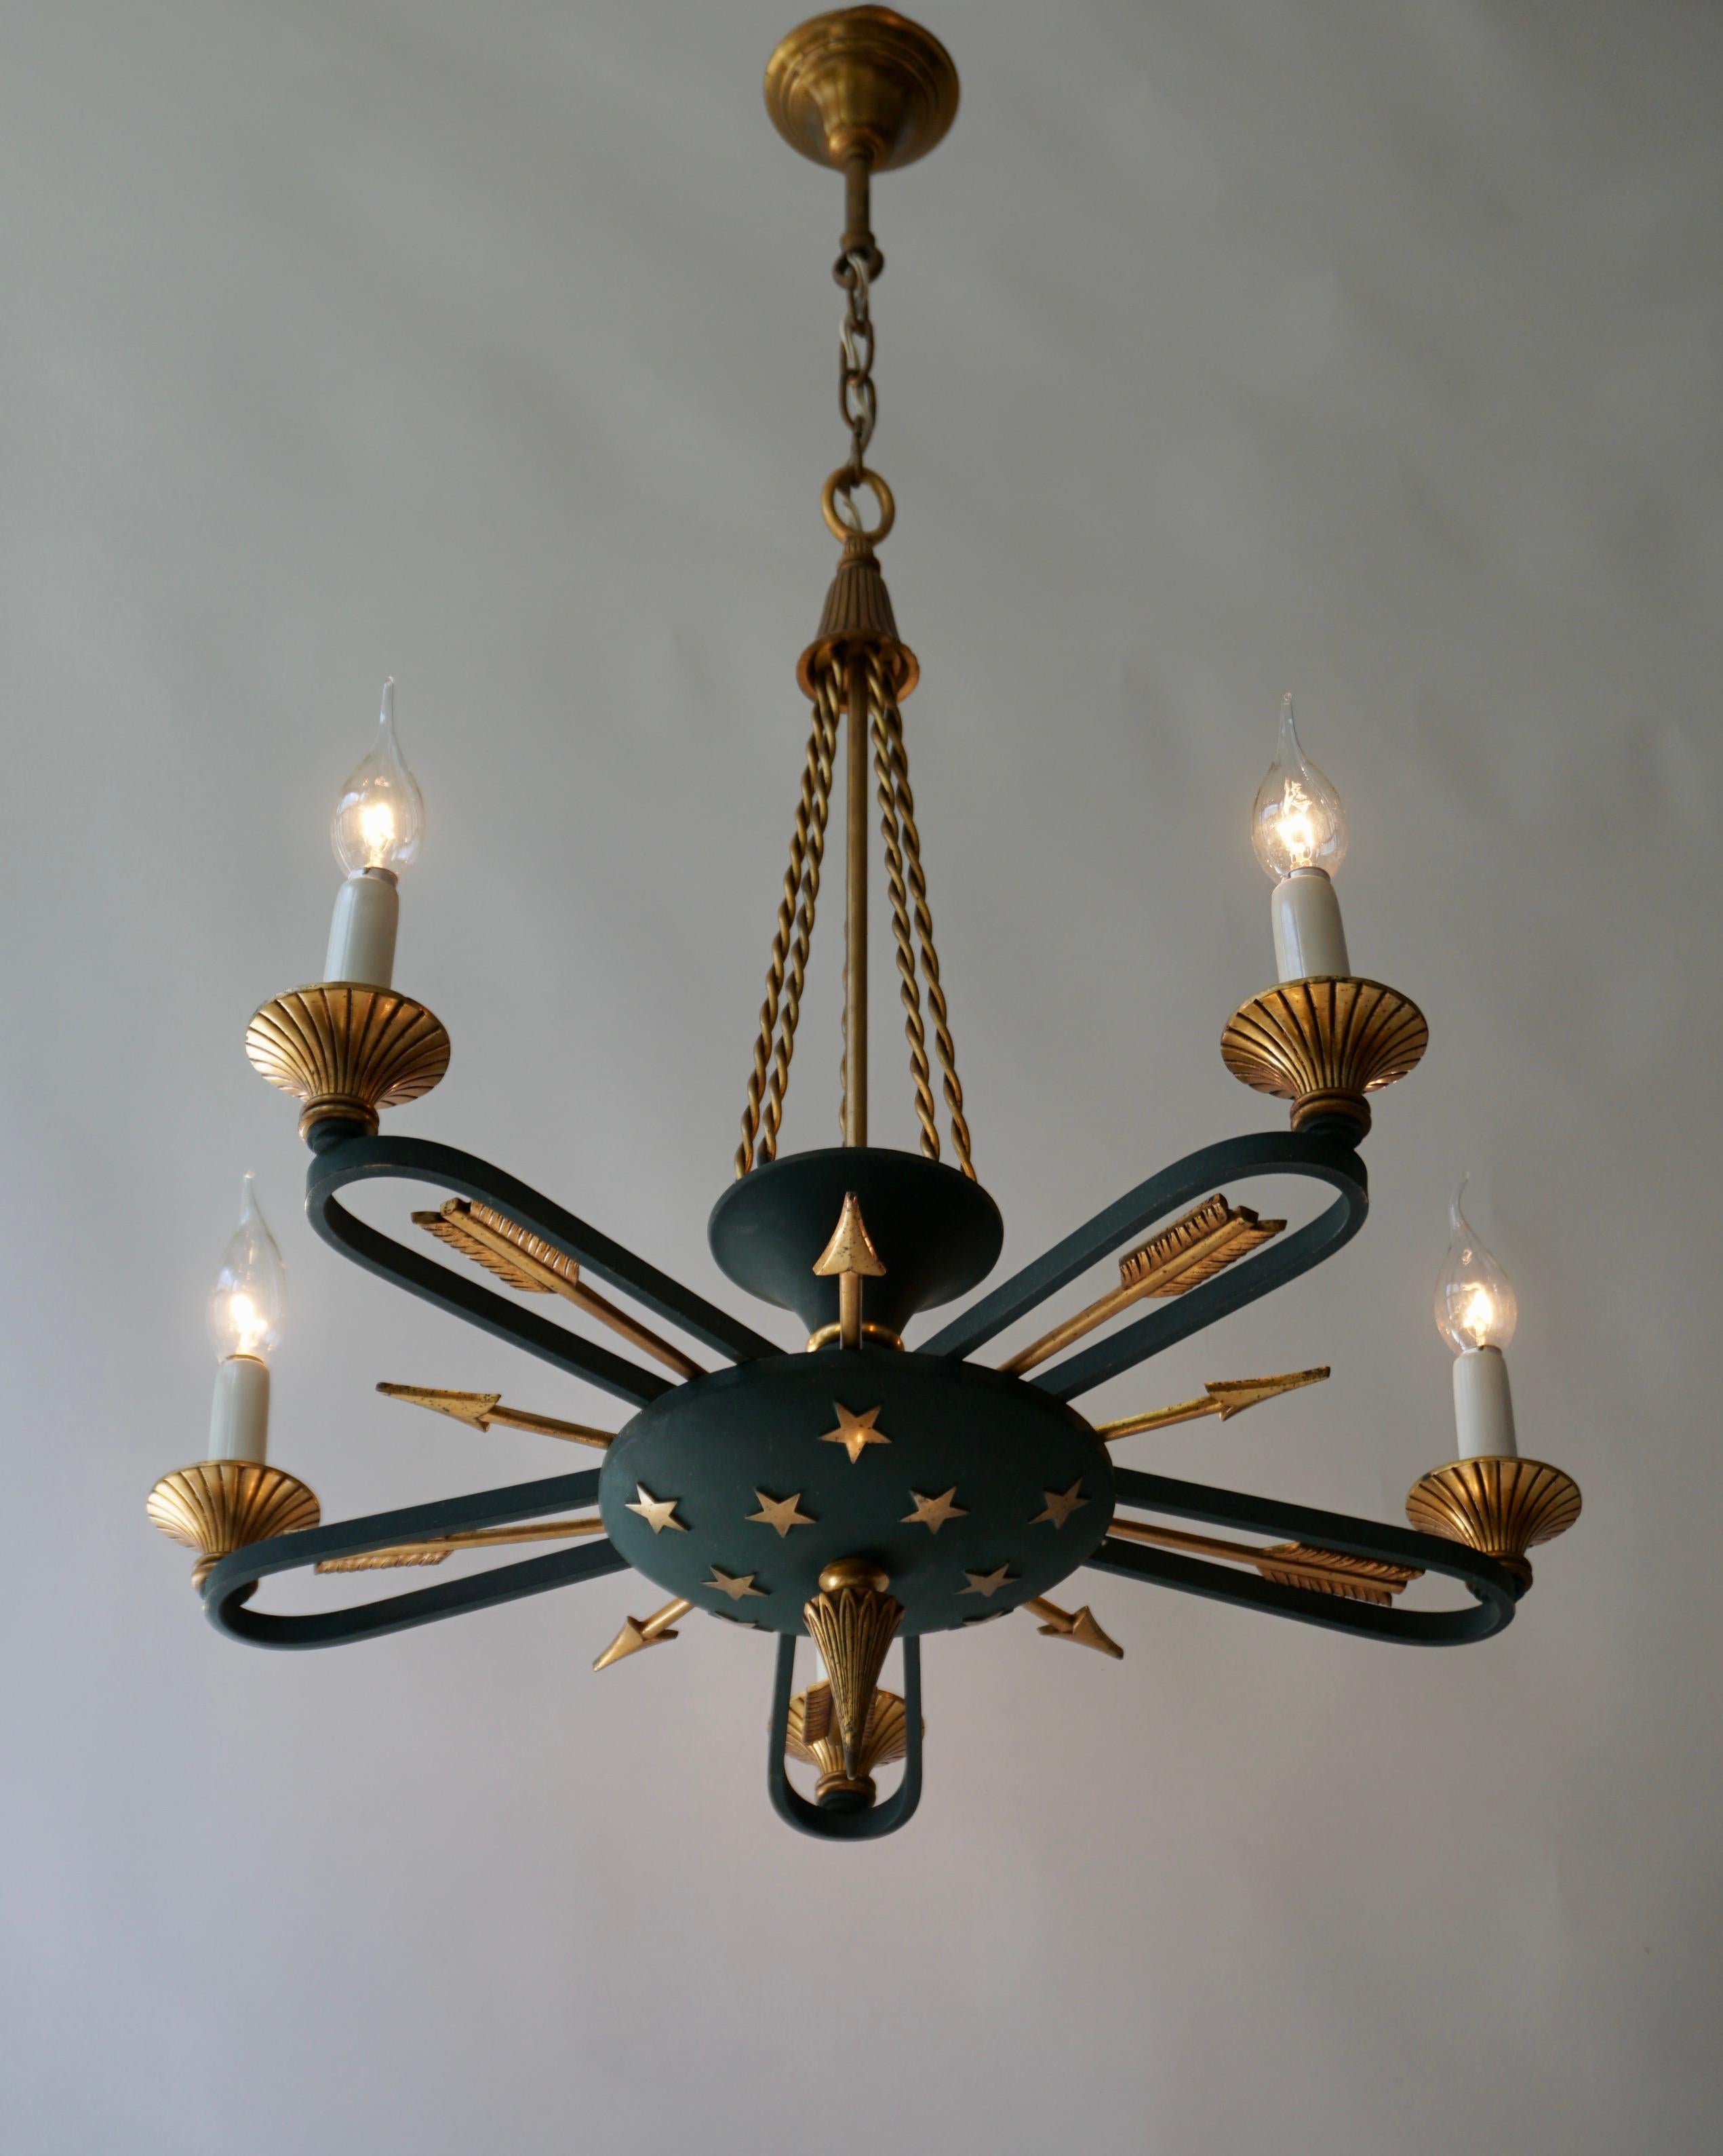 Empire Style gilt brass chandelier with stars and  arrows details.

Beautiful golden arrows and stars chandelier in gilded brass and antique green. Good general condition considering the period of the mid-20th century.

The chandelier has six